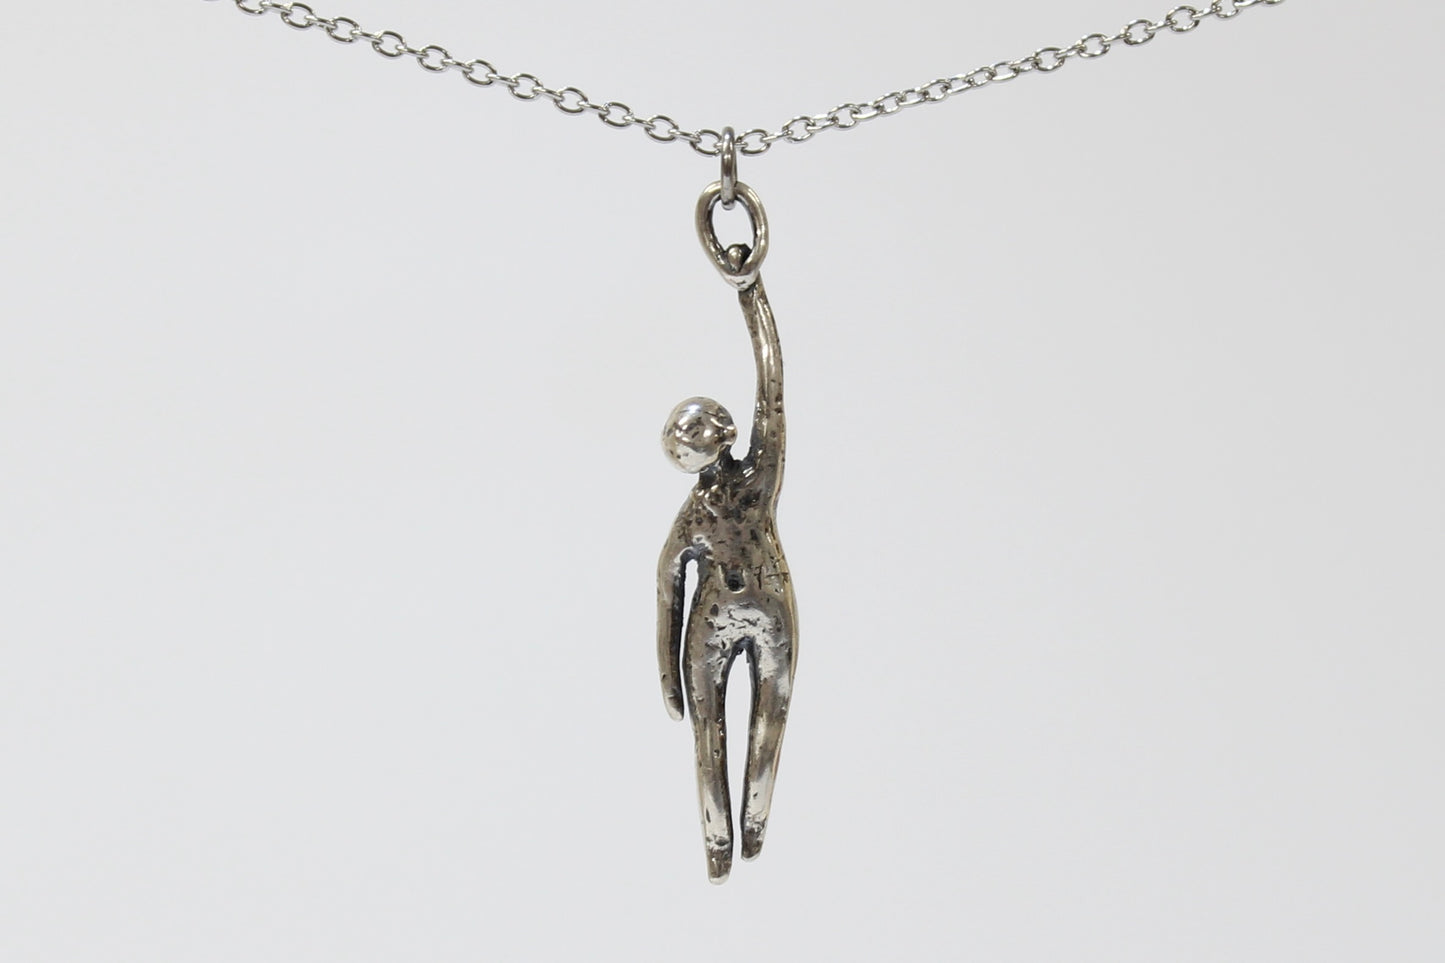 SILVER Hang in There Buddy (looking down) Pendant Necklace. Sterling silver. 1 1/2" x 1/2". Select chain length 16, 18, 20 inch